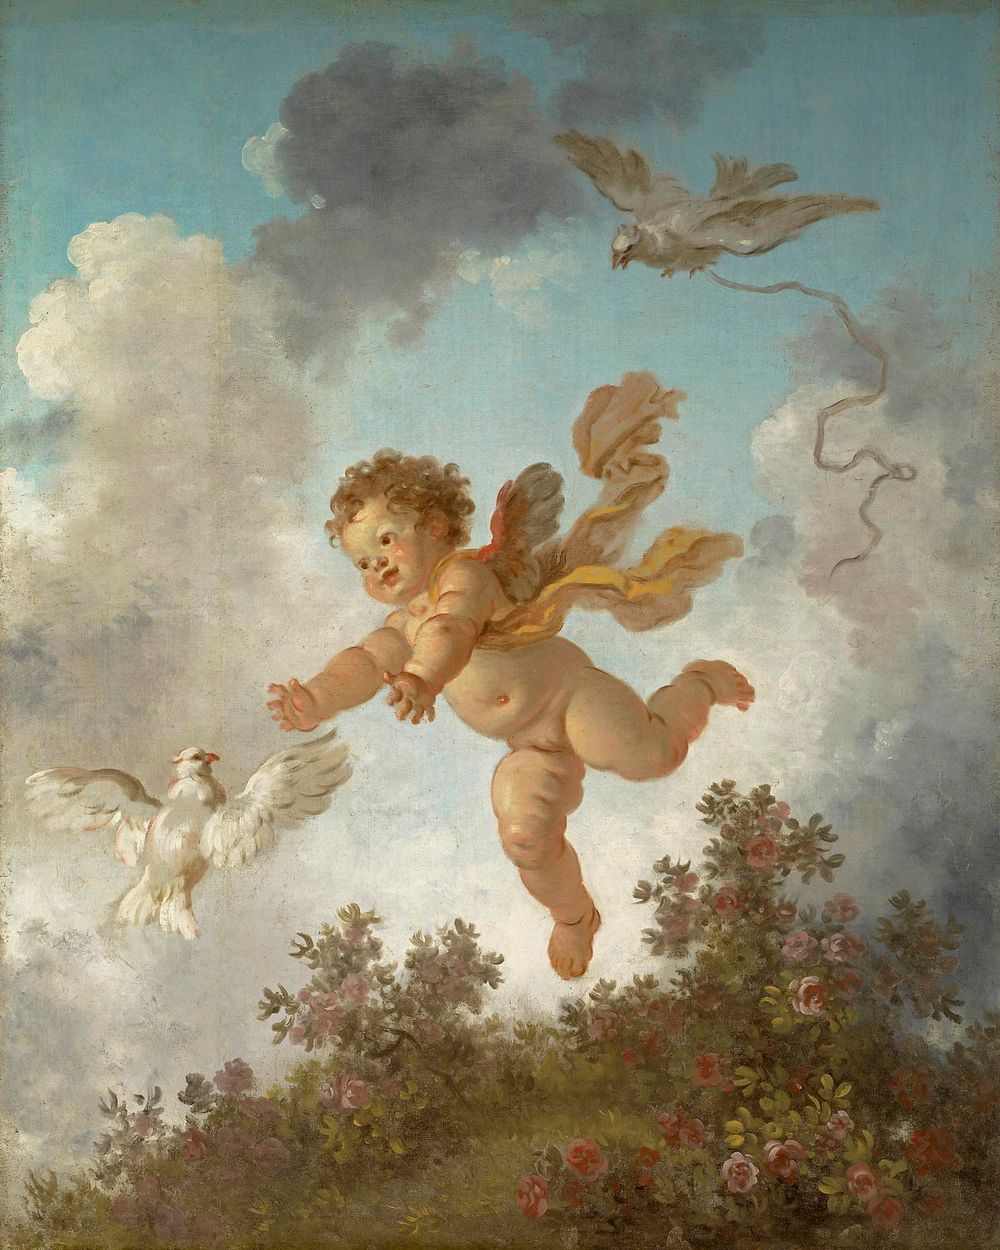 Jean-Honoré Fragonard (1732 - 1806)The Progress of Love: Love Pursuing a Dove, 1790-1791oil on canvas59 5/8 in. x 47 3/4 in.…